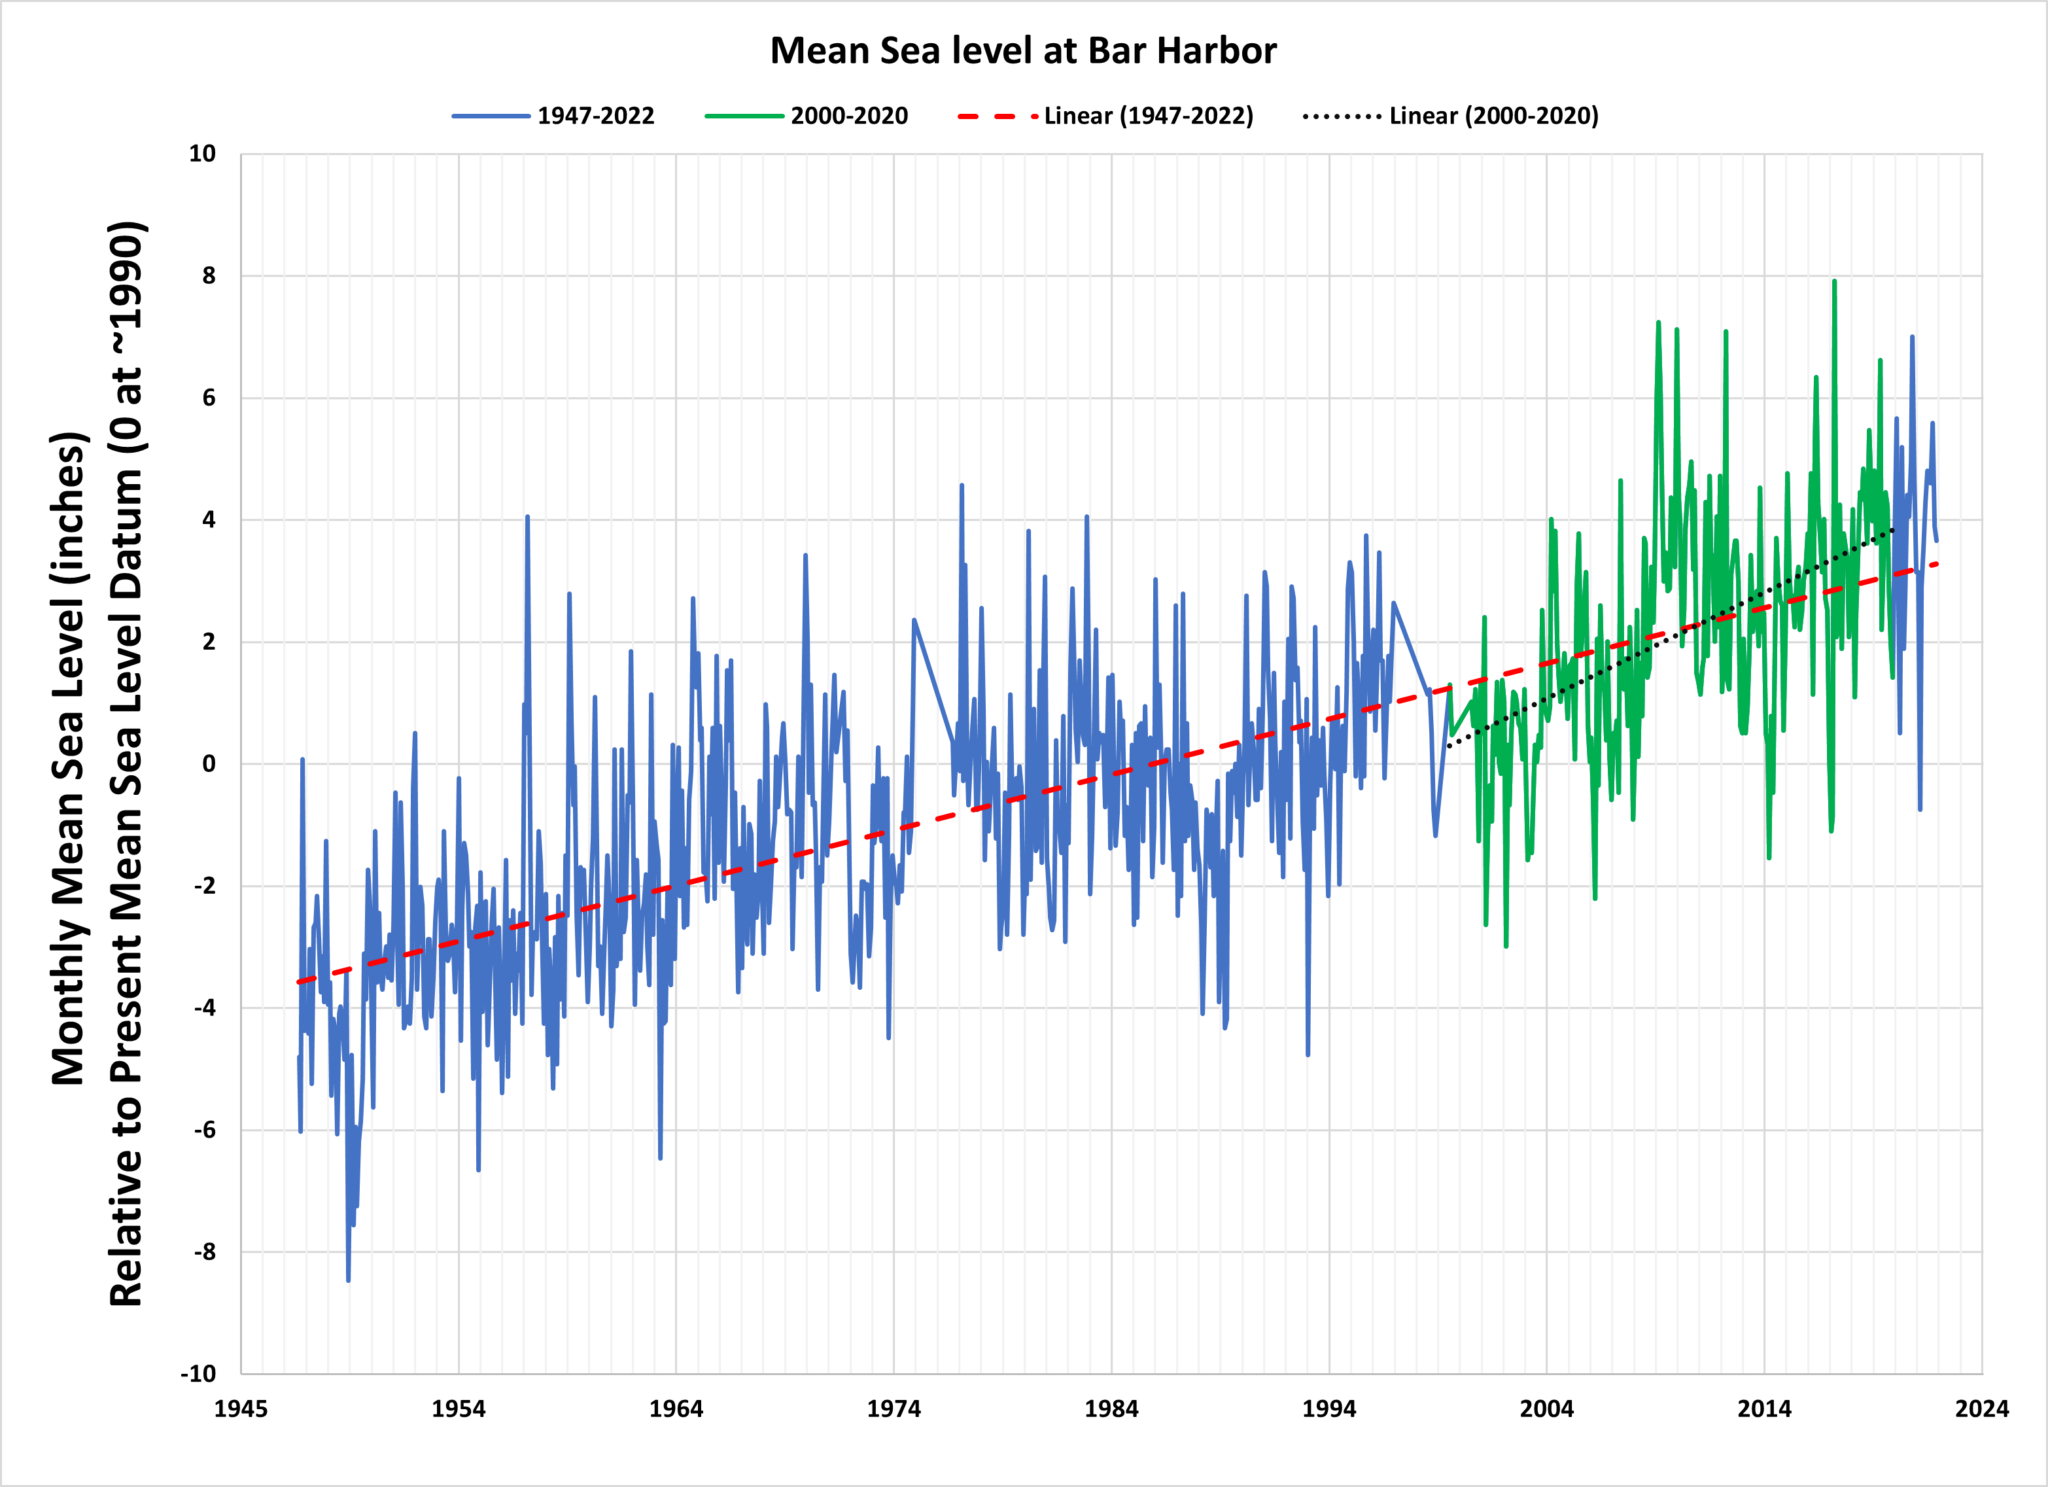 Line graph of sea level at Bar Harbor, showing inches above mean sea level on the y-axis and years on the x-axis. The line has lots of variation; a linear trend shows a steady increase from 1947 to 2000 and a steeper trend since 2000.